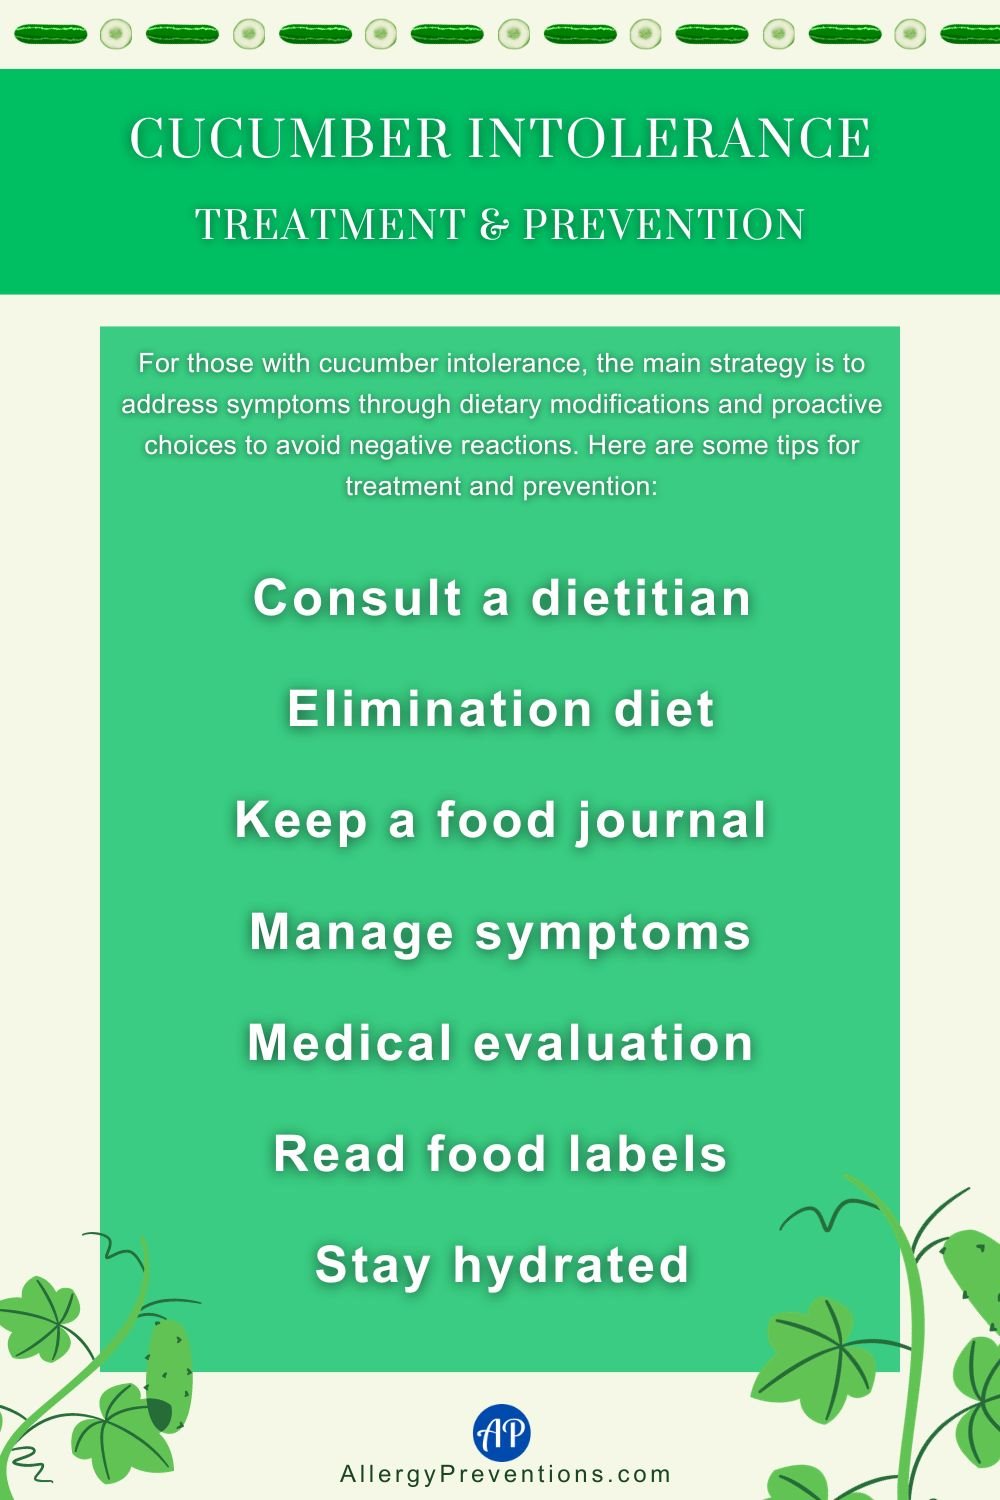 Cucumber intolerance treatment and prevention infographic. For those with cucumber intolerance, the main strategy is to address symptoms through dietary modifications and proactive choices to avoid negative reactions. Here are some tips for treatment and prevention: Consult a dietitian, Elimination diet, Keep a food journal, Manage symptoms, Medical evaluation, Read food labels, Stay hydrated.